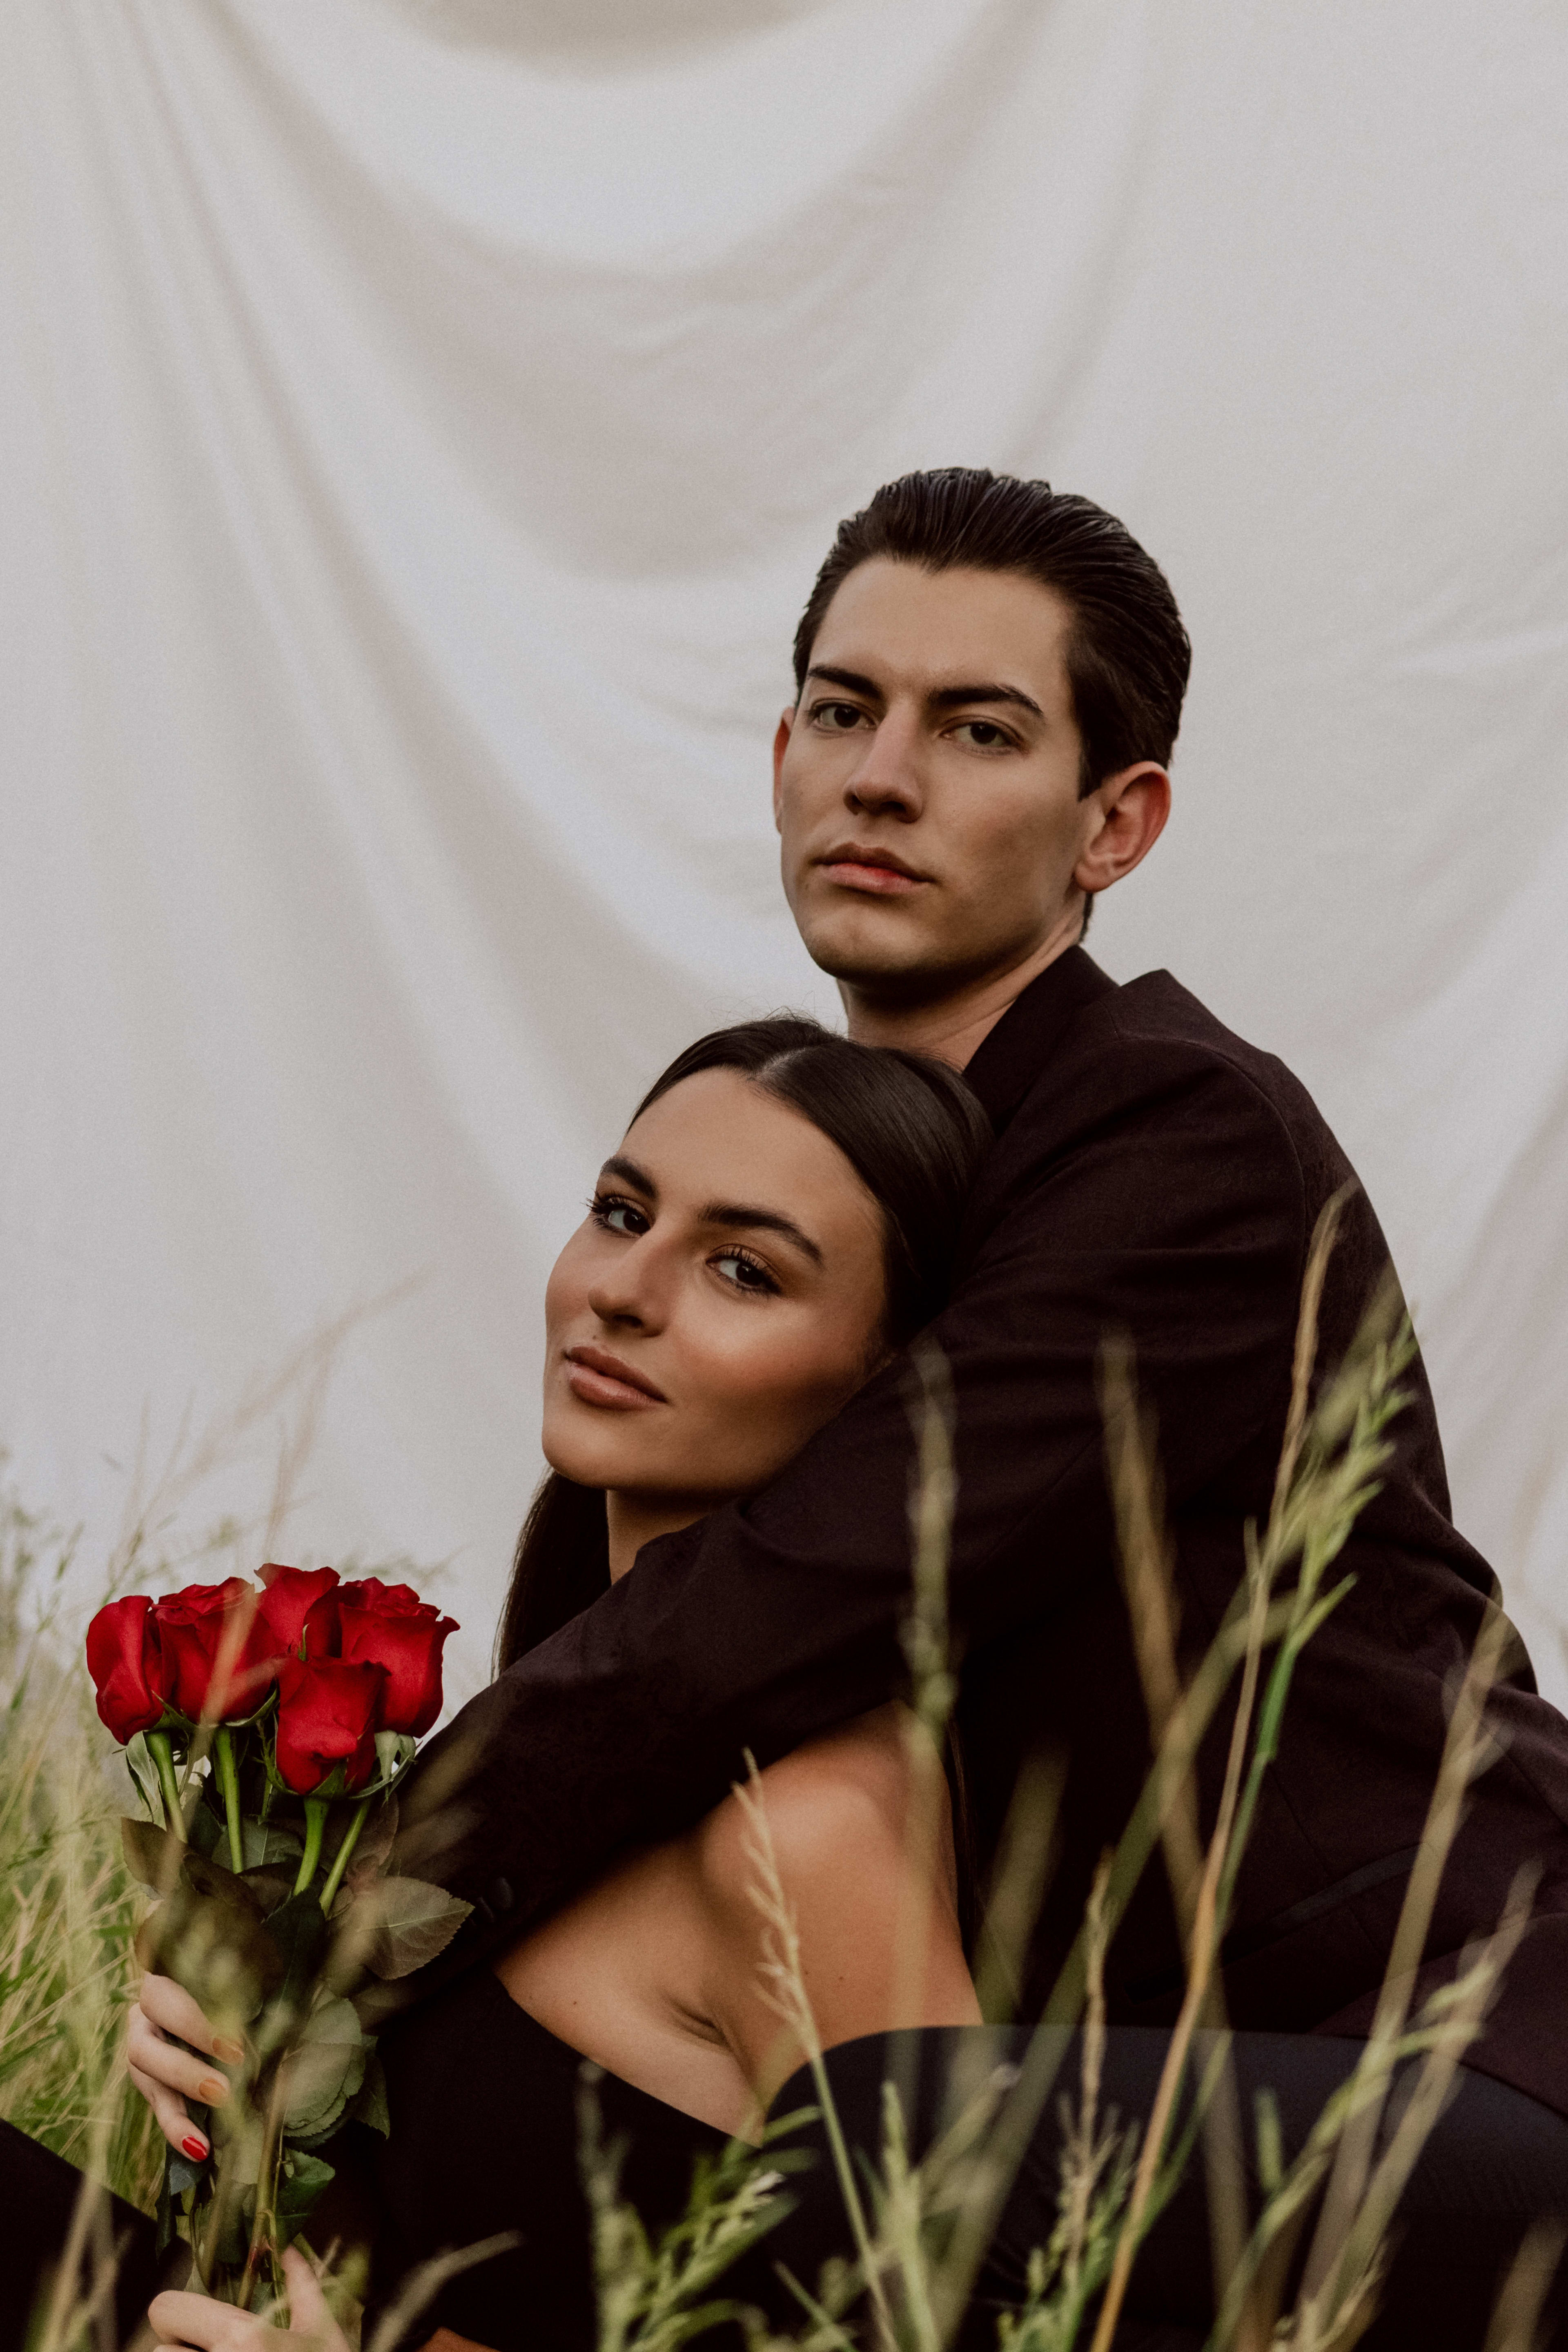 A couple holding red roses poses in beige clothing for an outdoor photoshoot in a garden surrounded by tall grass.